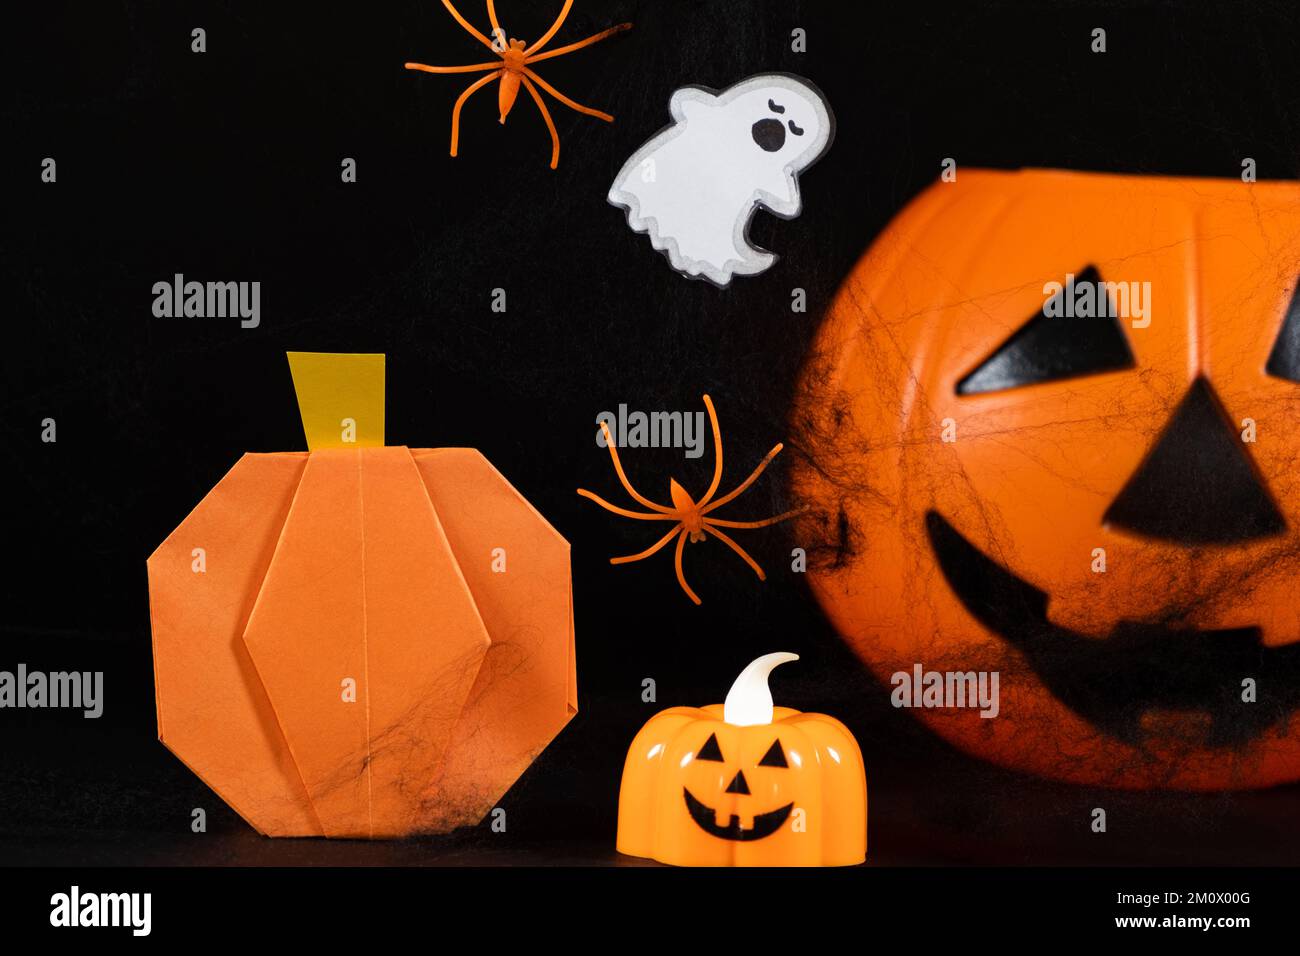 Orange pumpkins, a ghost, spiders and spider webs on a black background, a Halloween celebration. Stock Photo